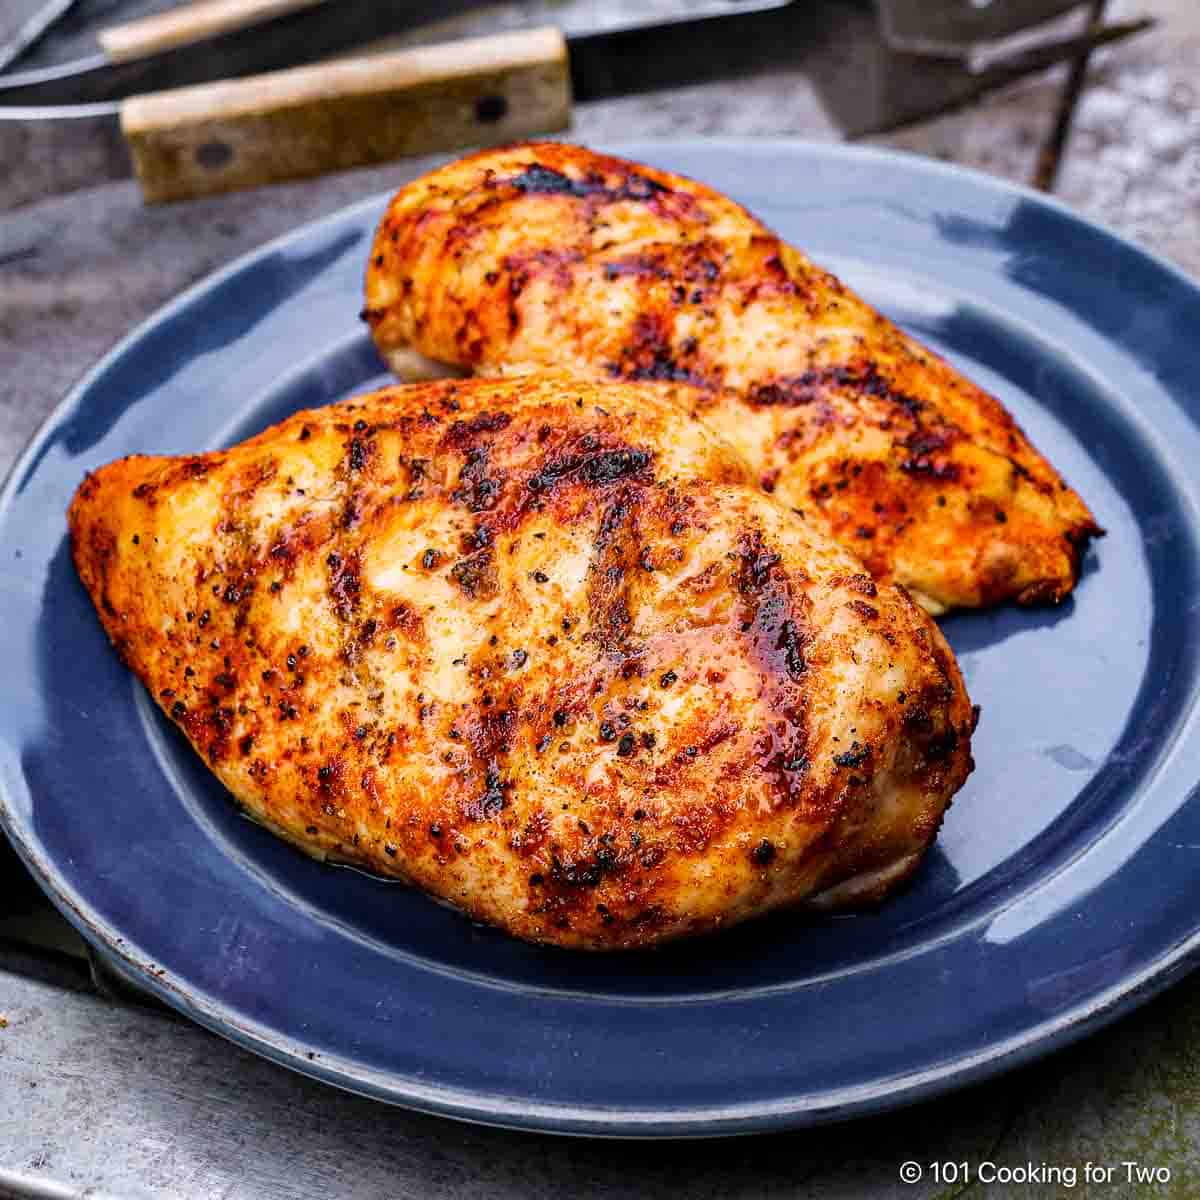 Grilled Chicken Breasts on a blue plate